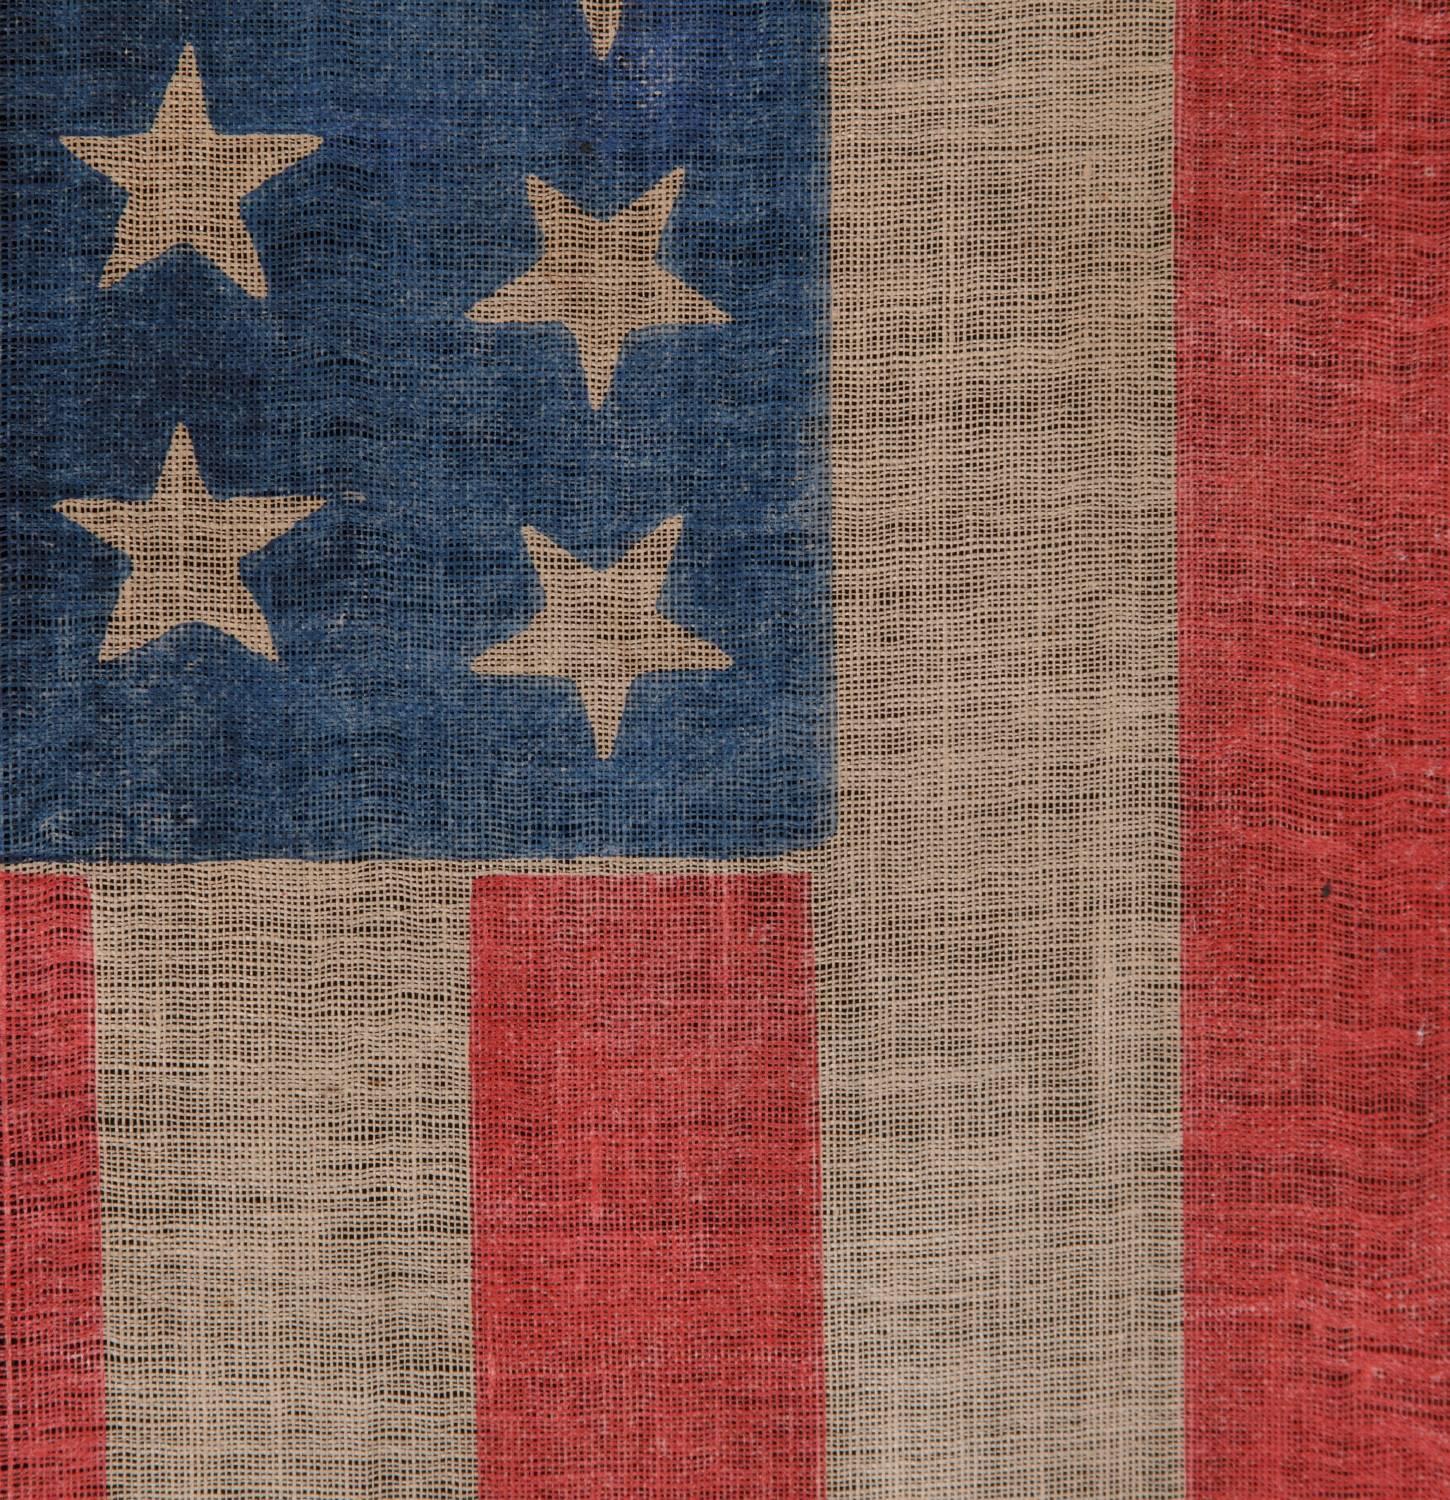 19th Century 44 Stars in Dancing Rows in an Hourglass Formation, on an Antique American Flag